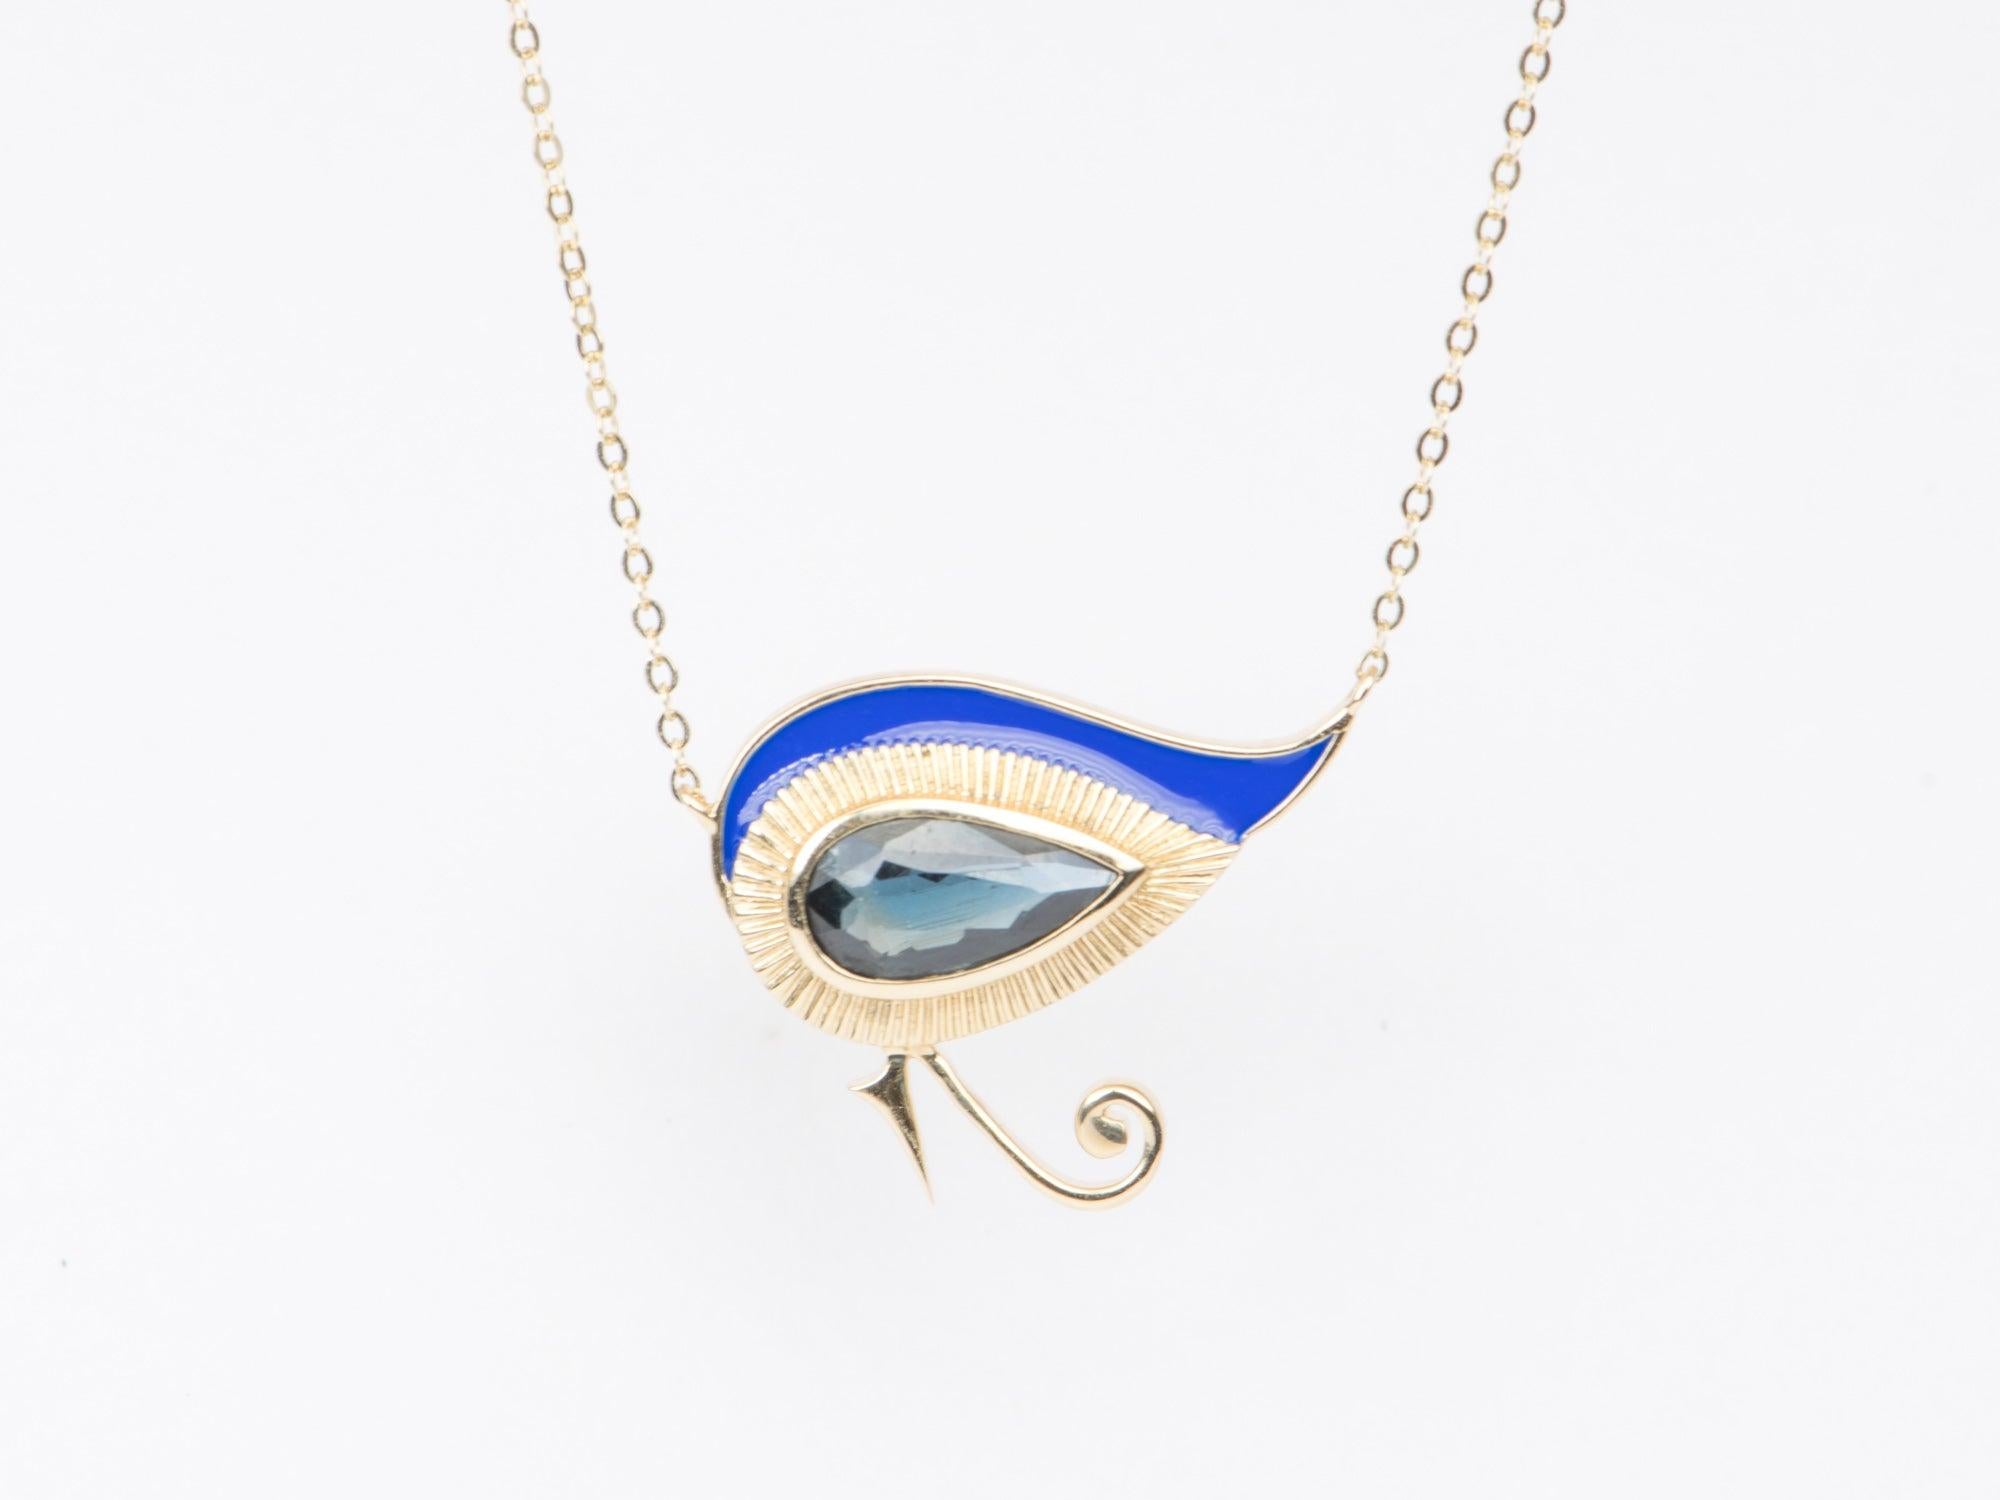 ♥ Eye of Horus Pear Shaped Sapphire 14K Yellow Gold Necklace with bright blue enamel
♥ The item measures 19.2mm in length, 23mm in width, and stands 3.5mm from the finger

♥ Gemstone: Sapphire, 1.82ct
♥ All stone(s) used are genuine, earth-mined,